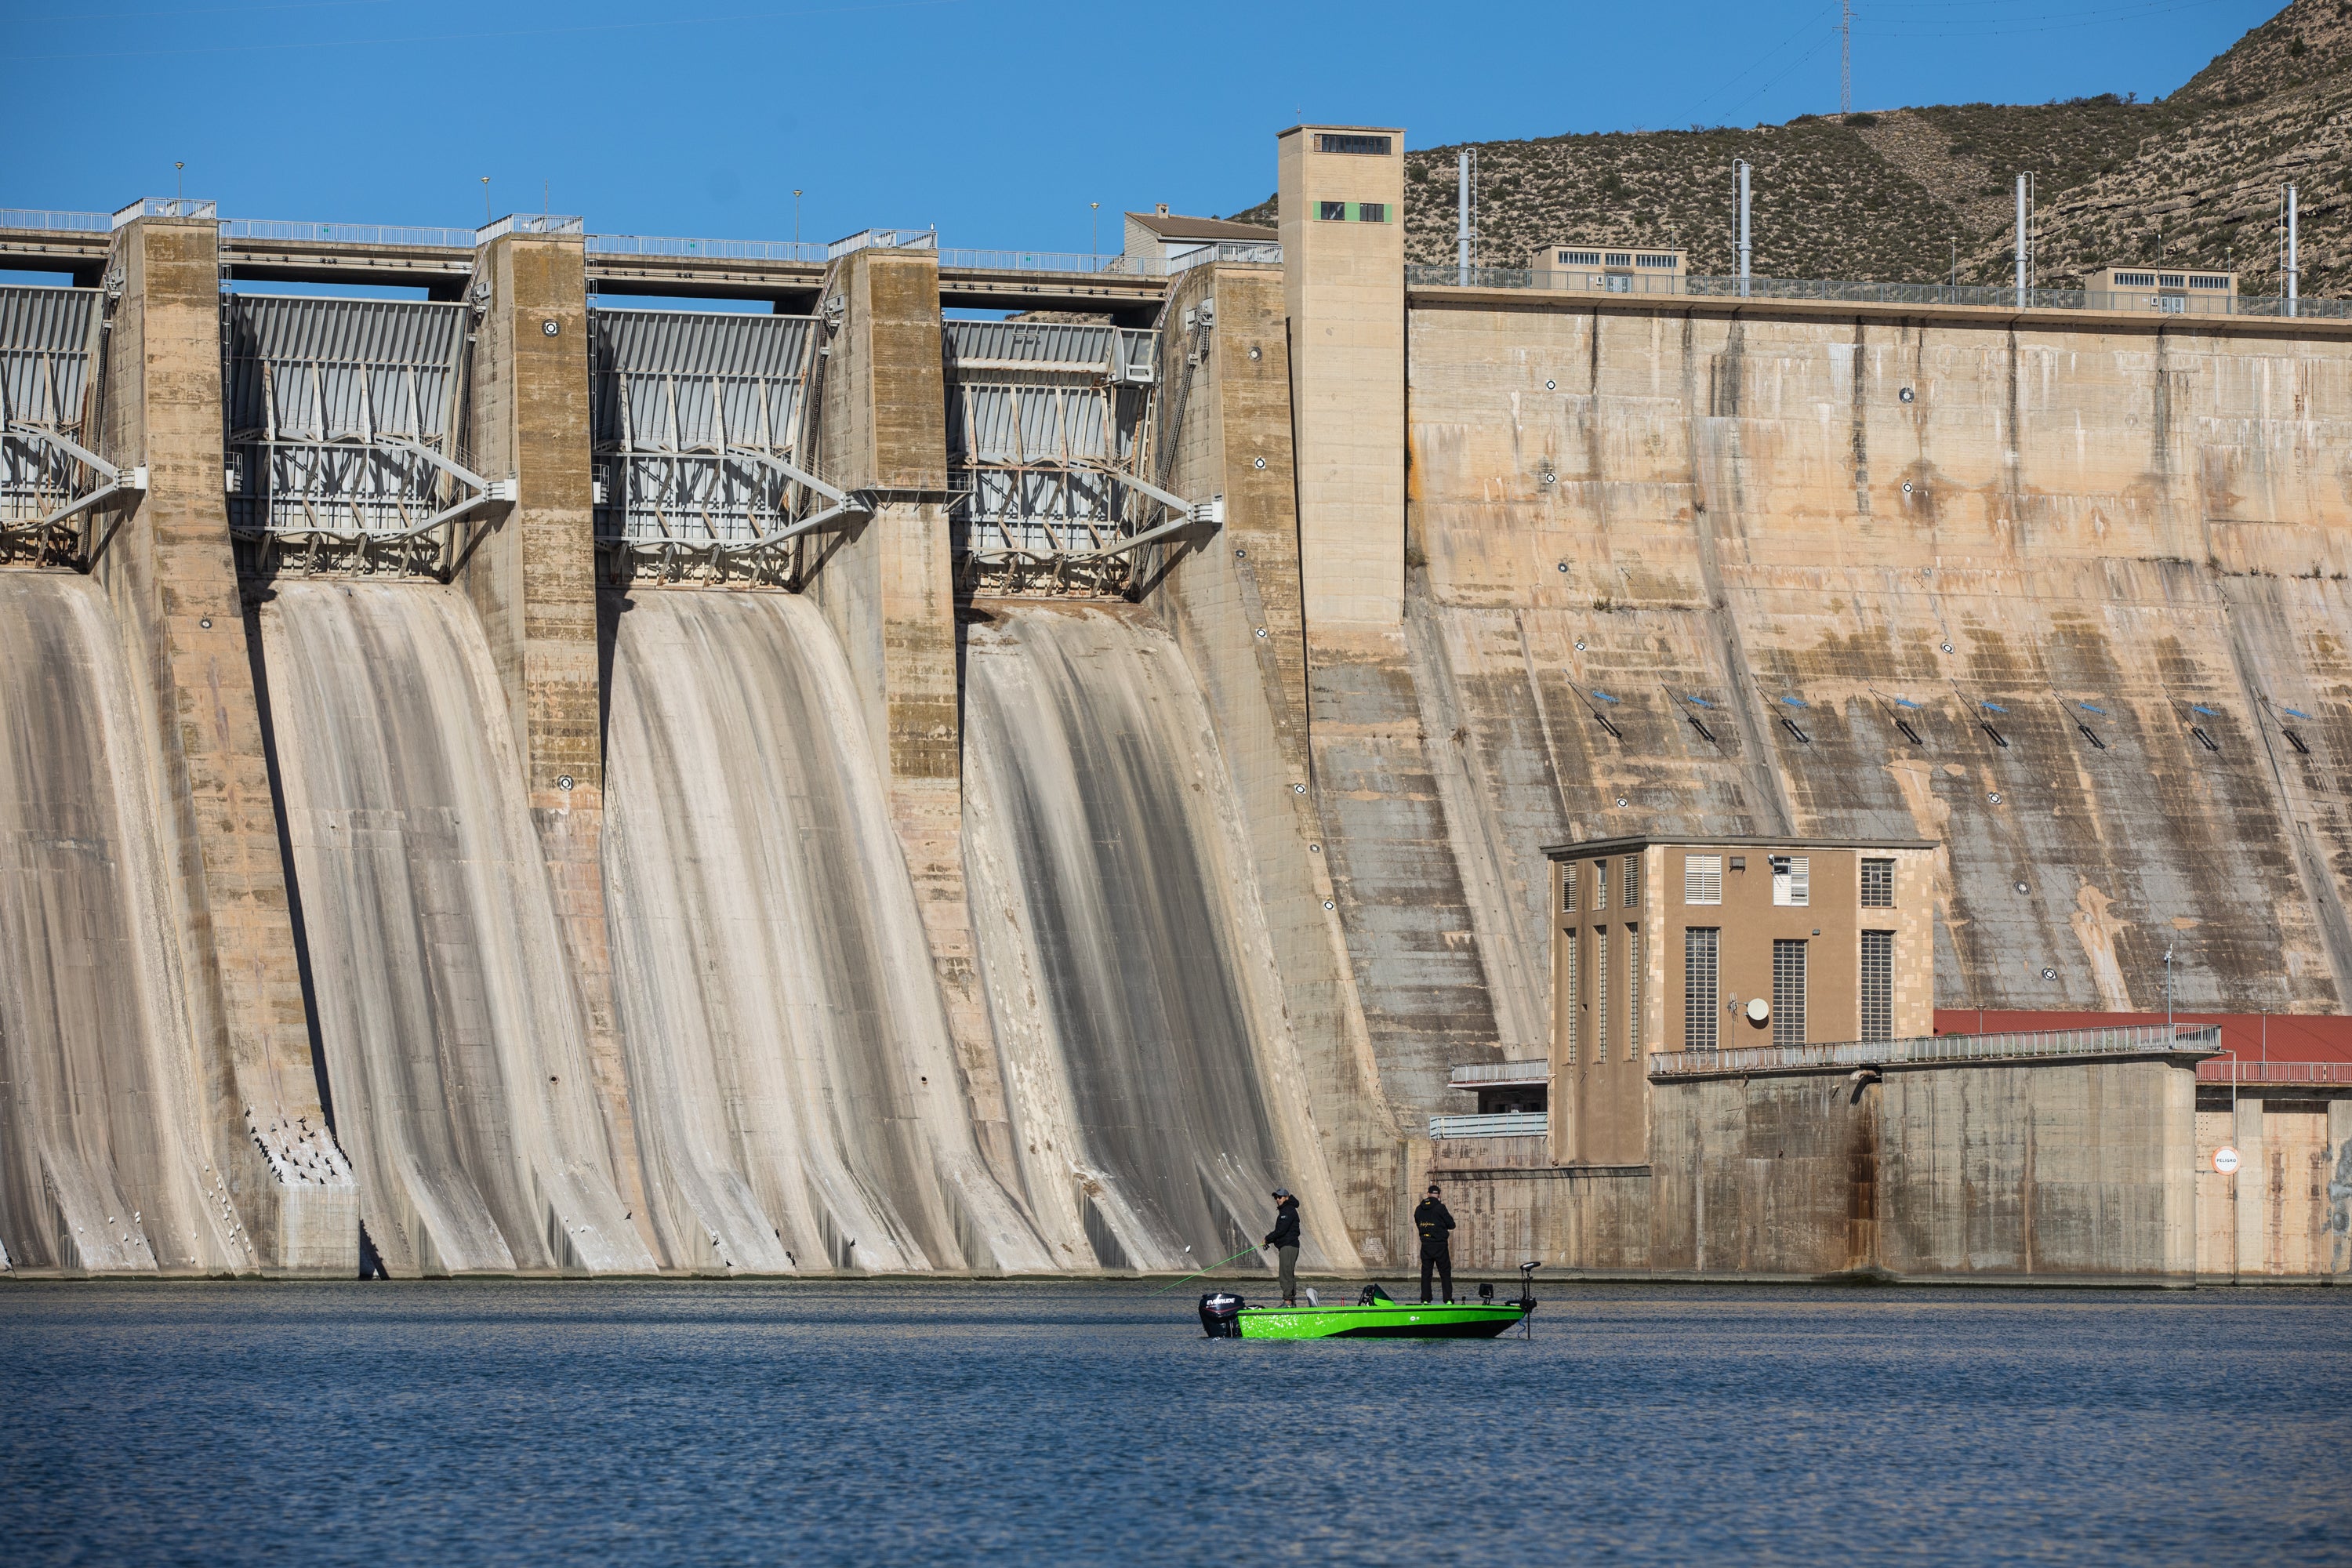 People fishing in front of the dam.  (Photo: Zowy Voeten, Getty Images)